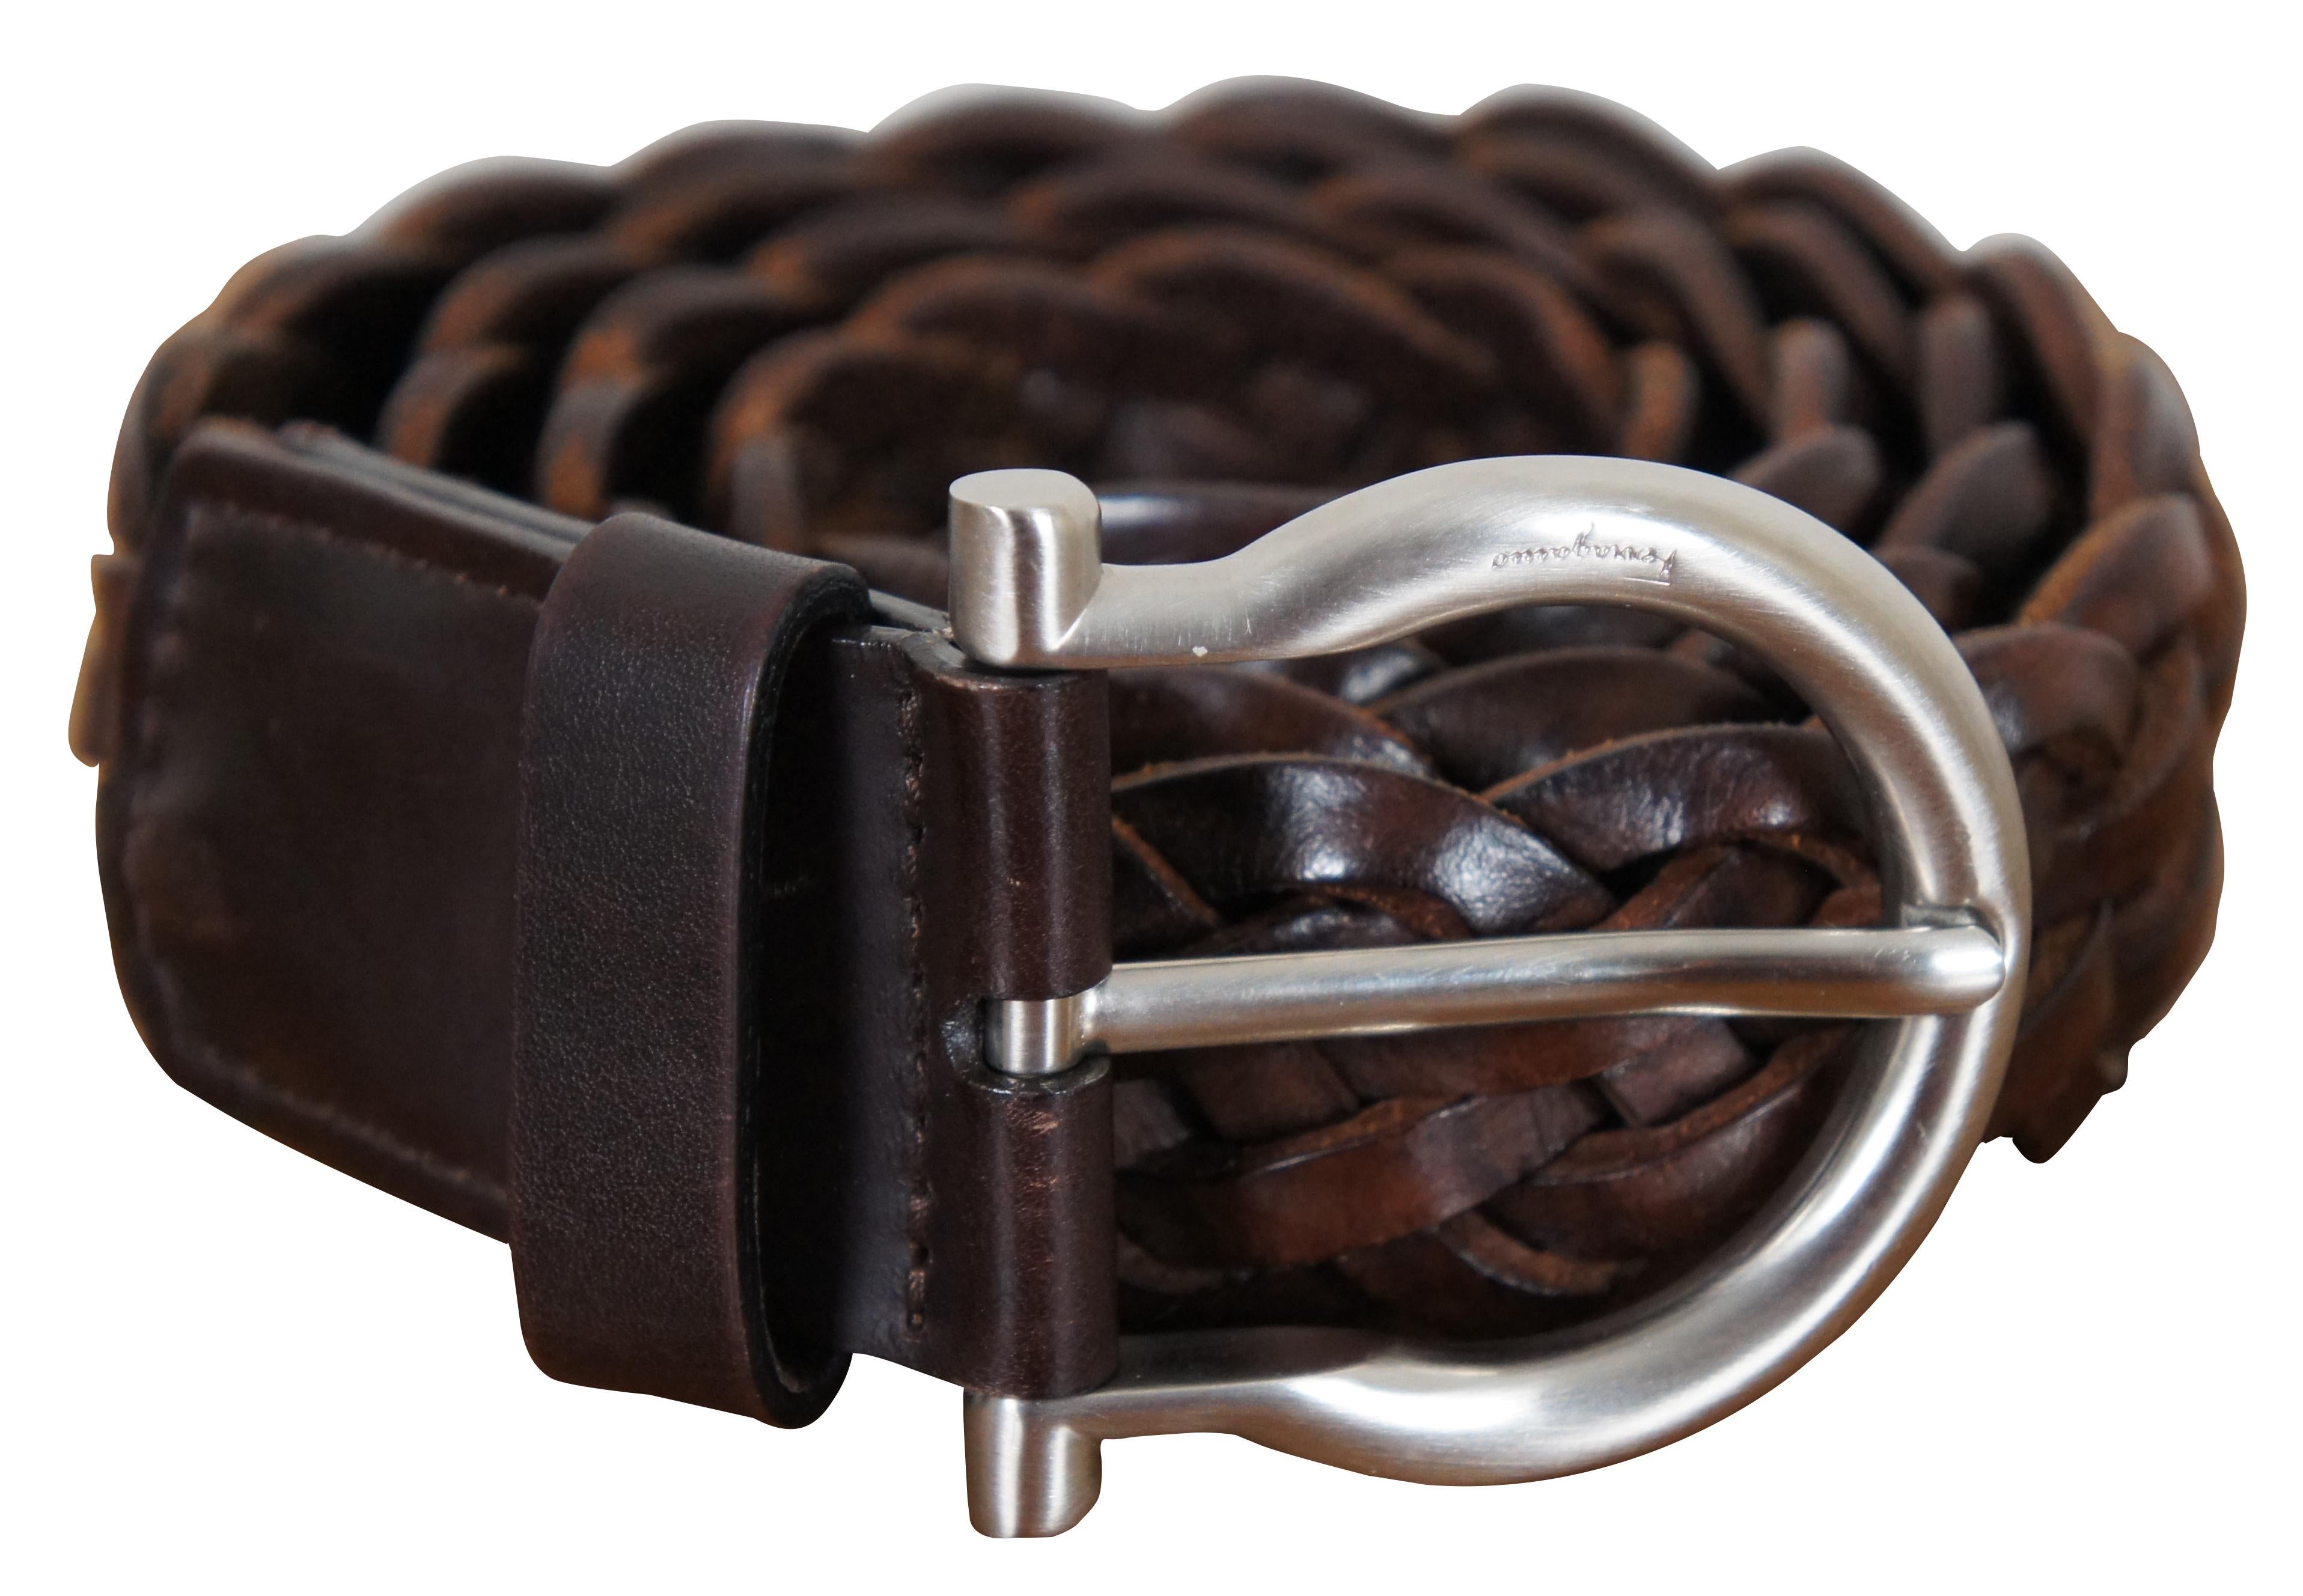 Salvatore Ferragamo brown leather woven / braided belt with Gancini horseshoe shaped silver toned buckle.

Size 40 / Total Length – 47.5” x 1.5” / Buckle - 2.25” x 2.375” (Length x Width).